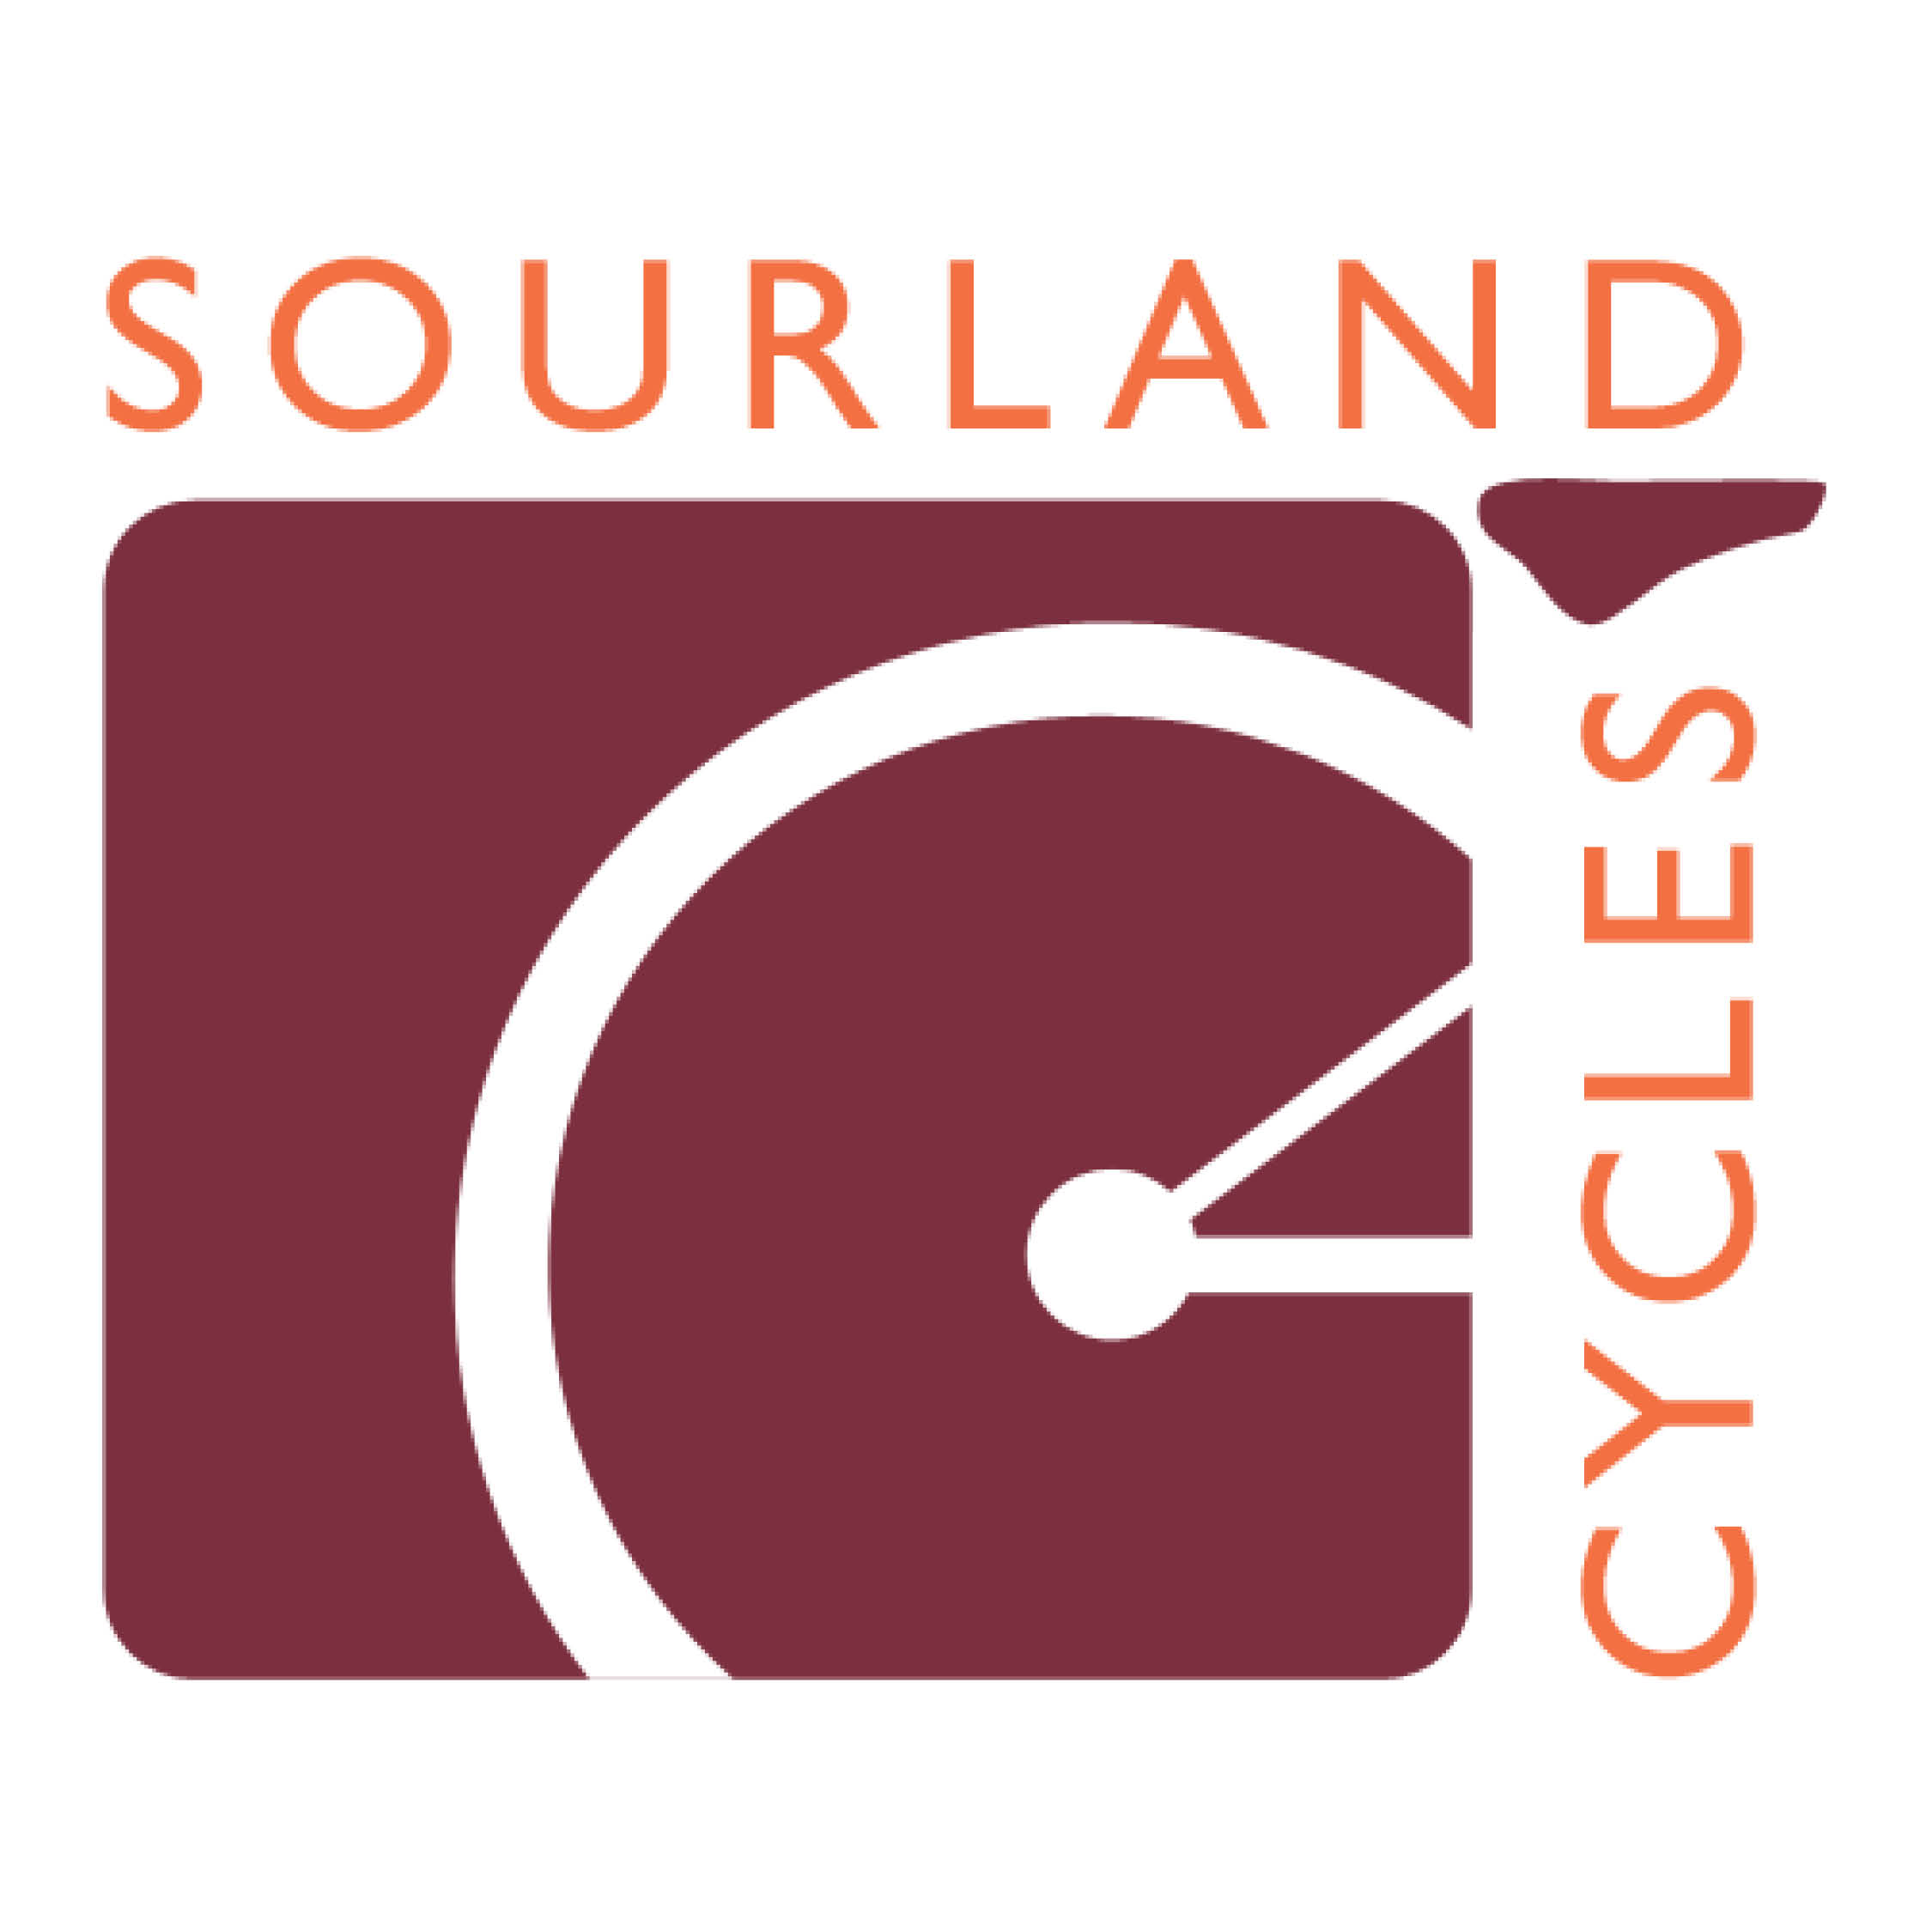 Sourland Cycles